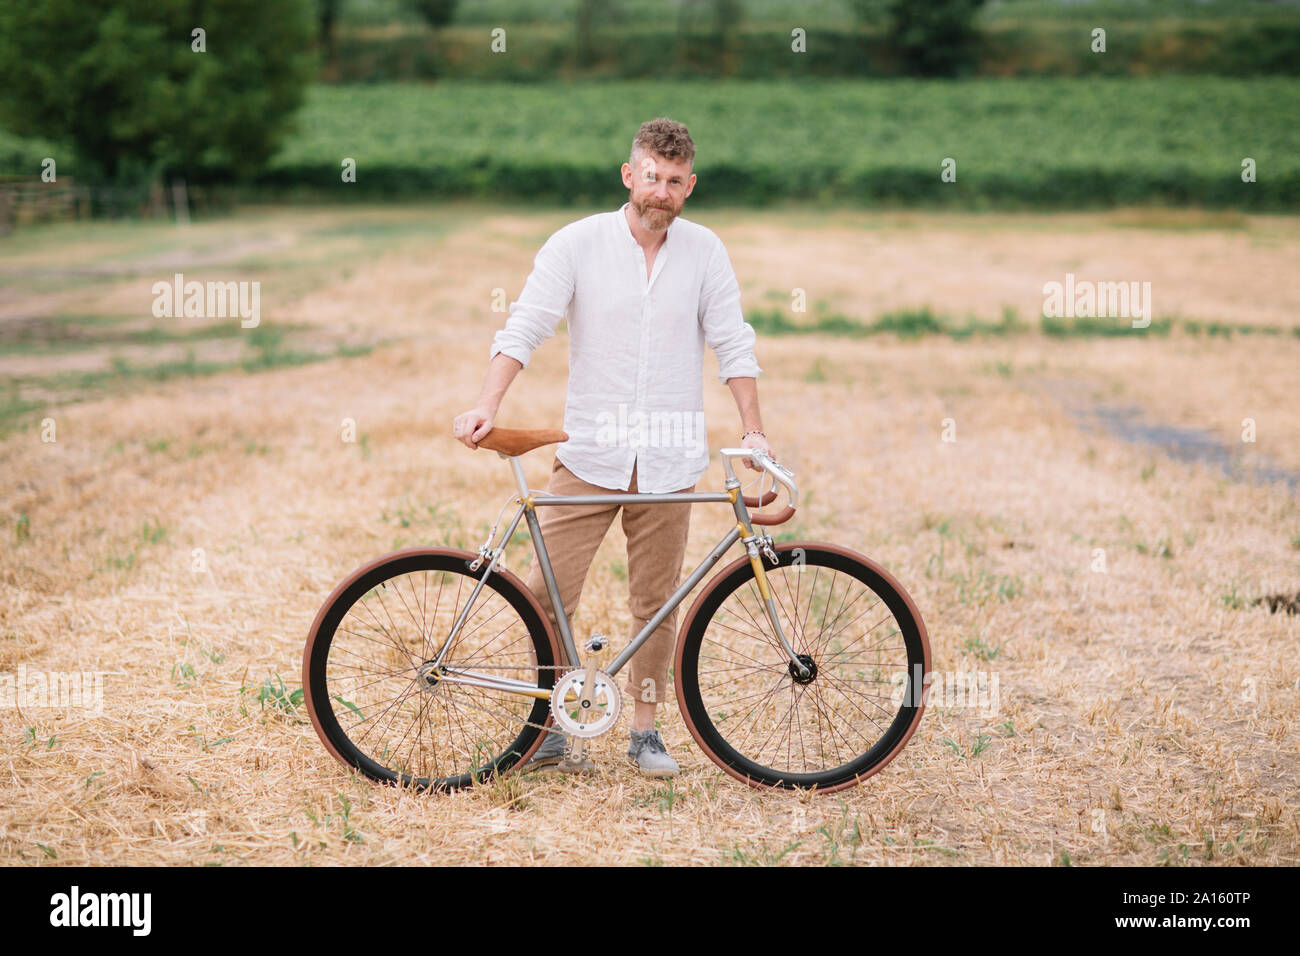 Man with handcrafted racing cycle on stubble field Stock Photo